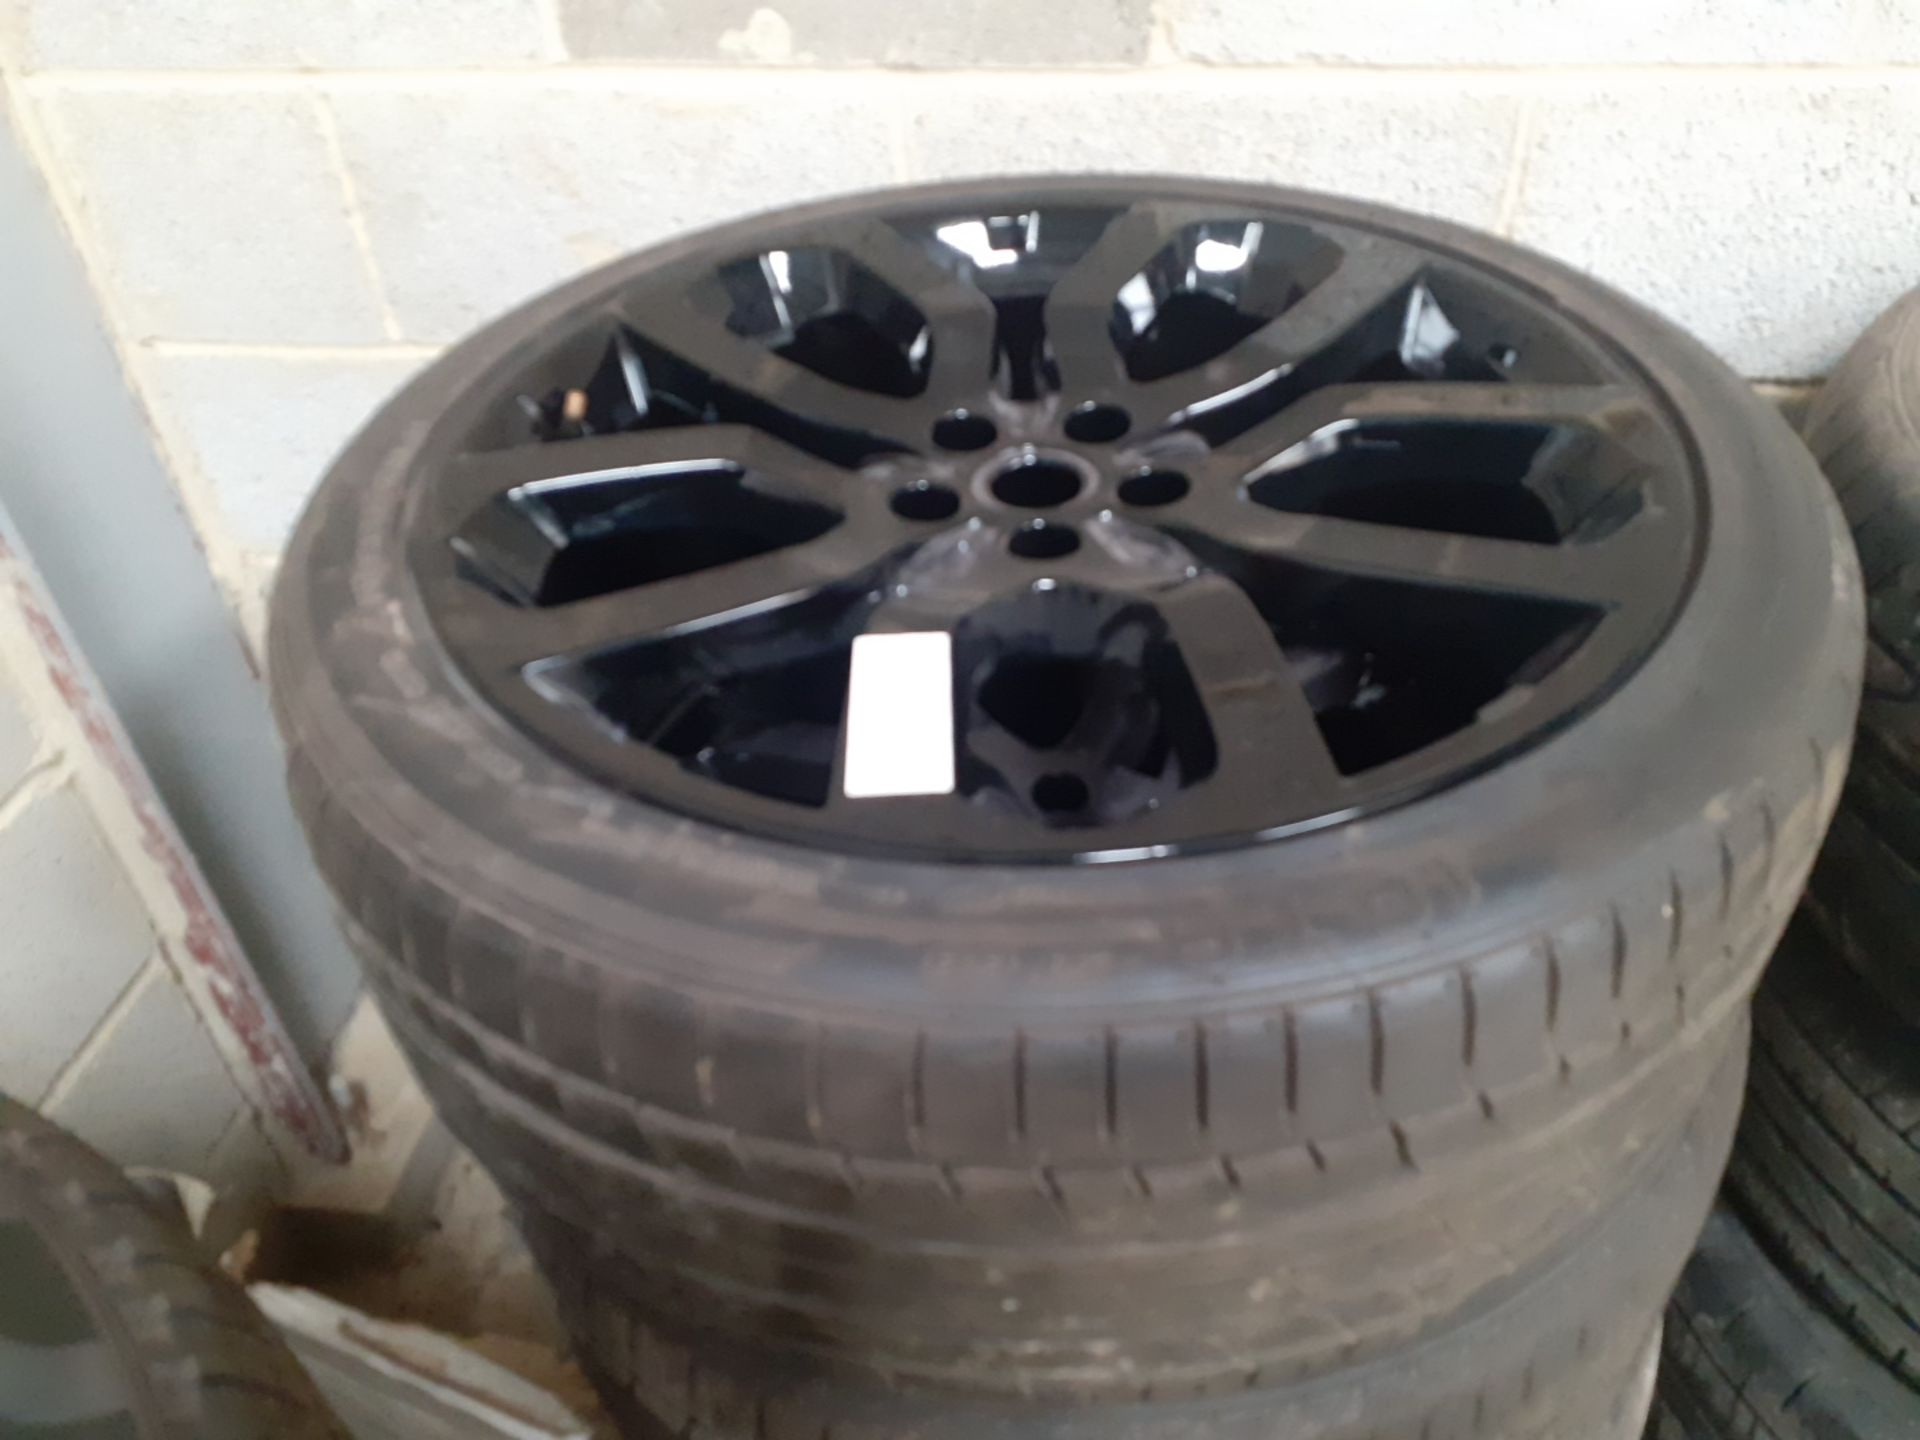 JOB LOT OF 30 SETS OF ALLOY WHEELS WITH TYRES, LAND ROVER RANGE ROVER, OVER £31K RRP *NO VAT* - Image 10 of 17